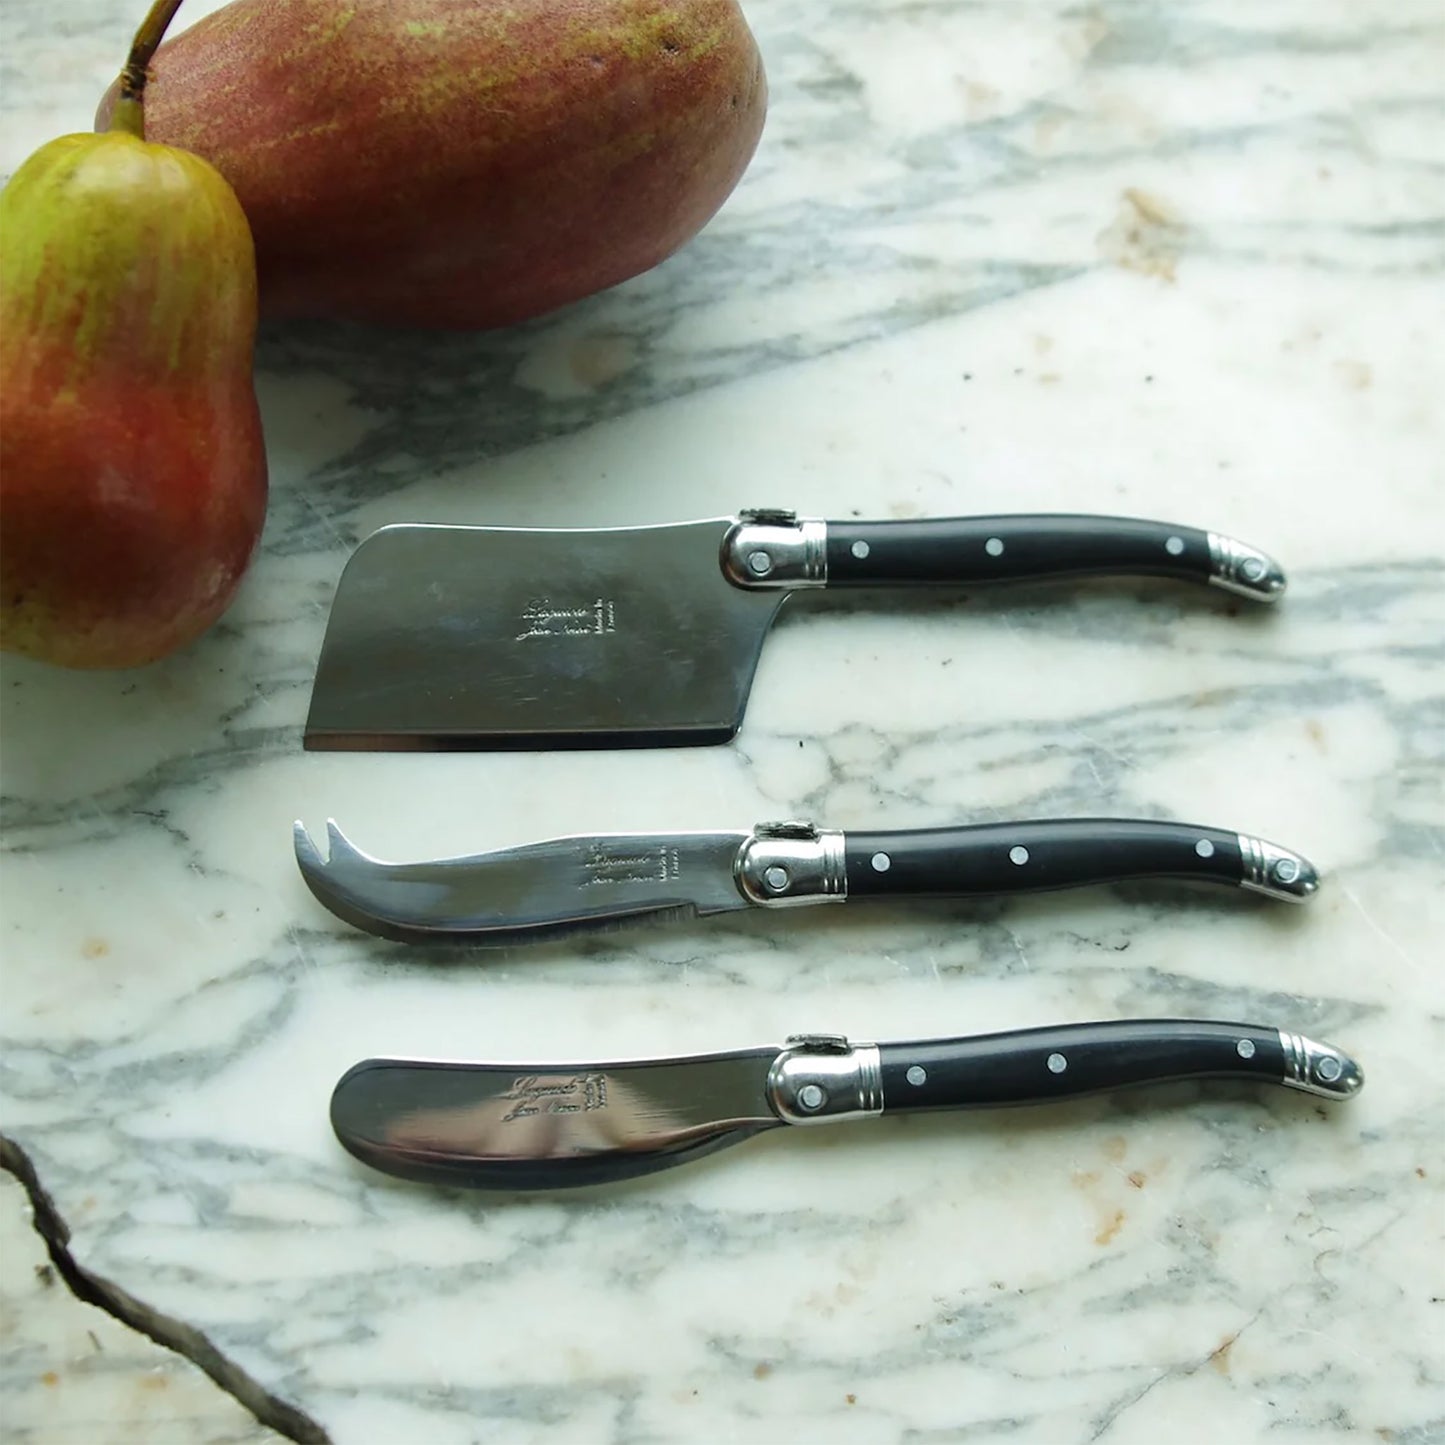 Lagouile 3 piece cheese knife set on a marble countertop with pears